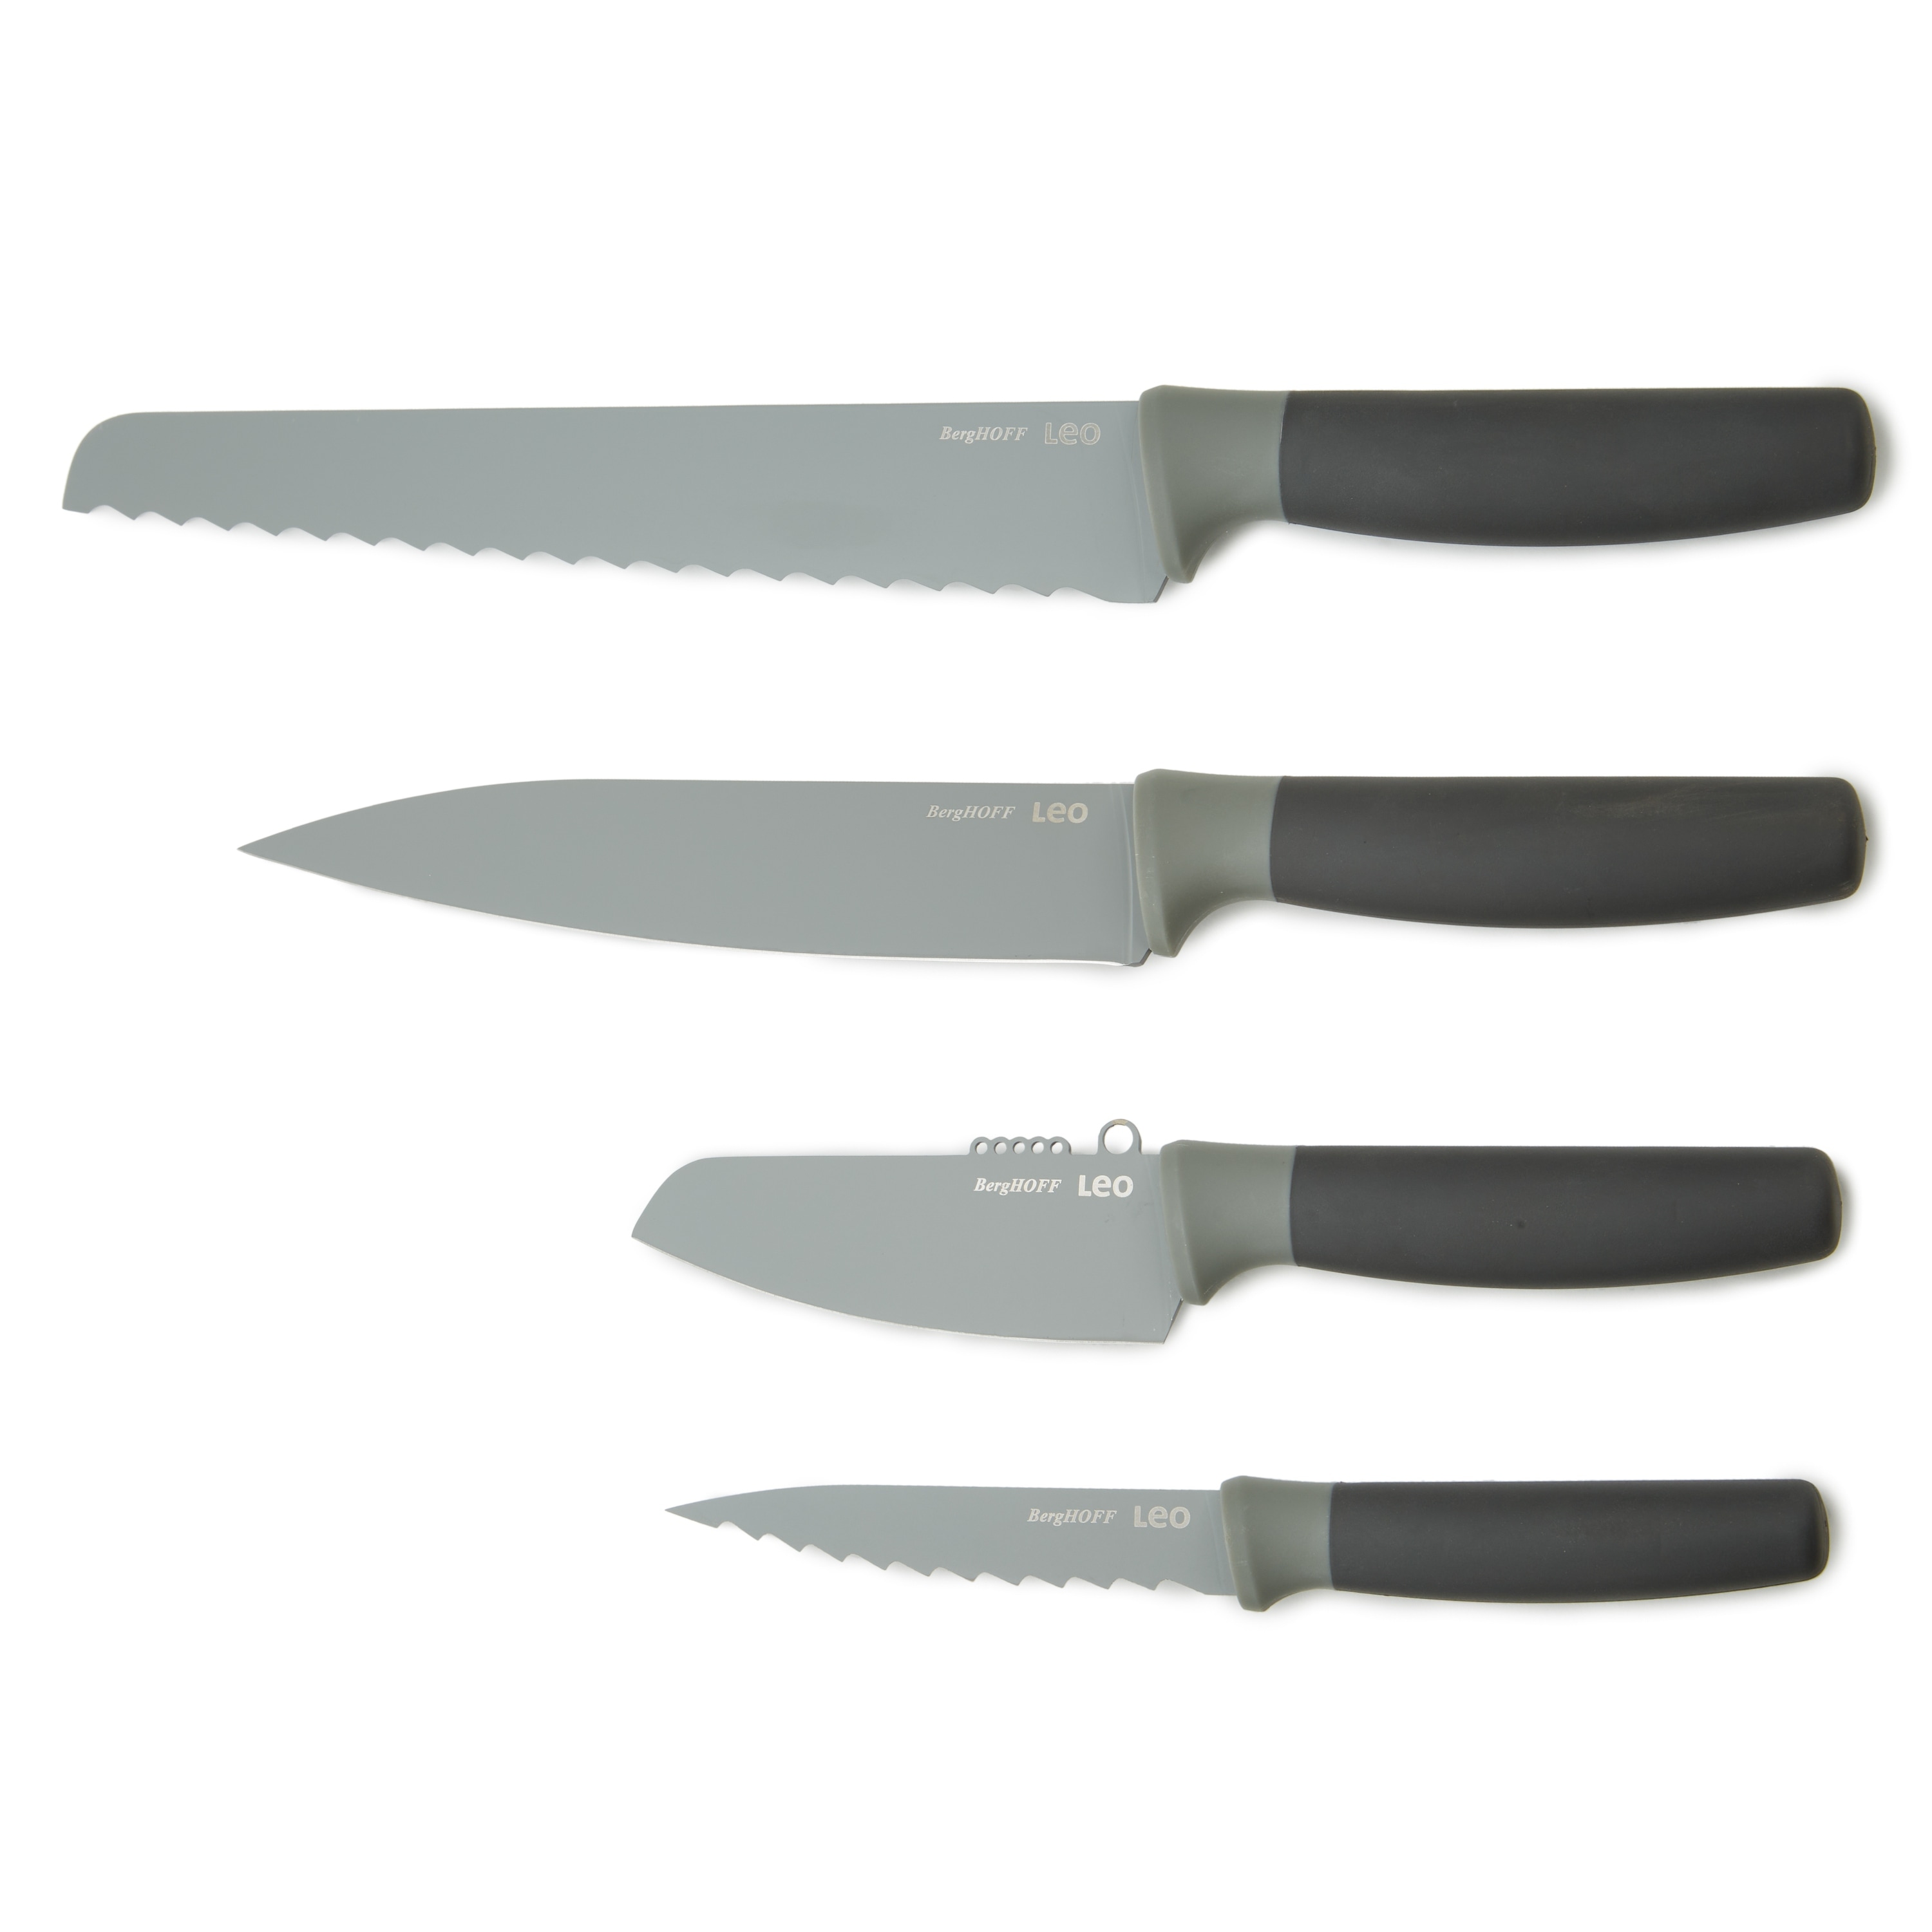 https://ak1.ostkcdn.com/images/products/is/images/direct/afa49455d824cf7afc55a8468941226e144221d9/BergHOFF-Balance-4Pc-Nonstick-Knife-Set%2C-Recycled-Material%2C-Protective-Sleeve-Included.jpg